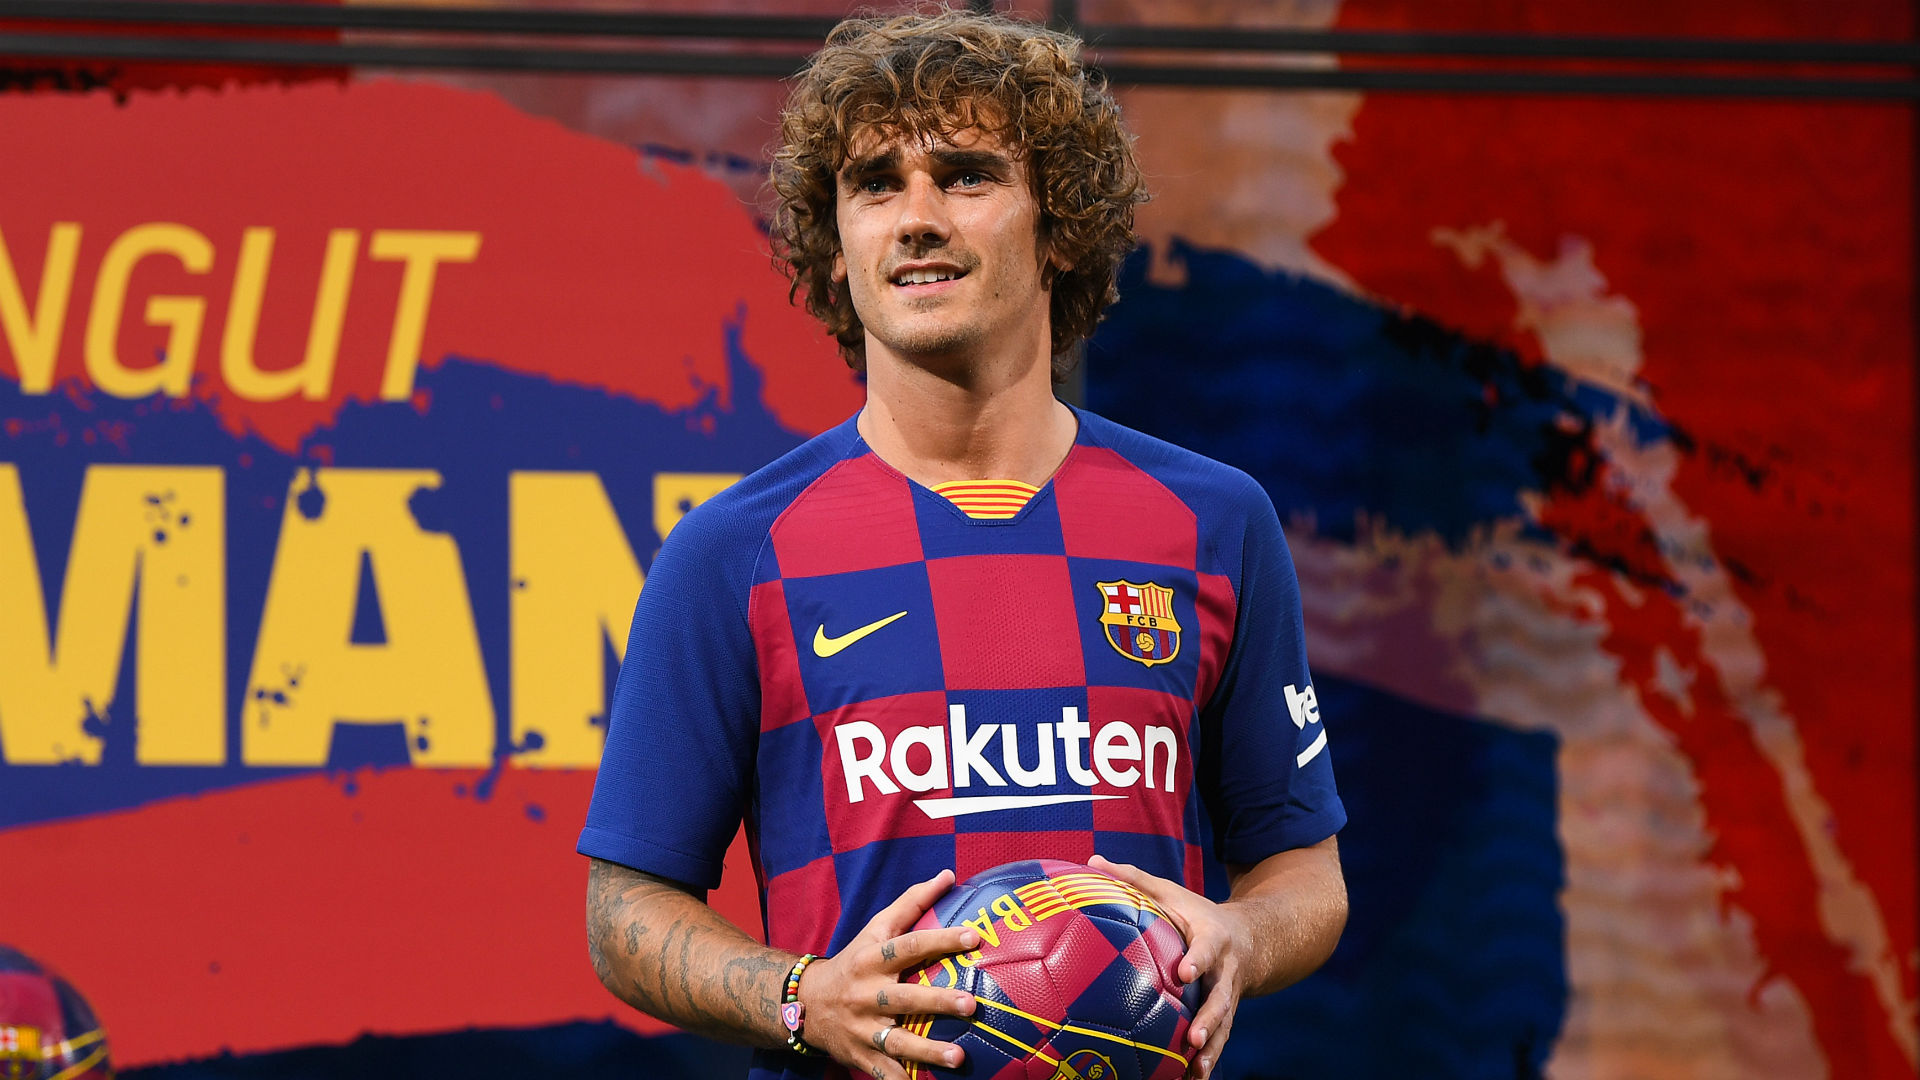 'There is no evidence of anything' - Barcelona deny wrongdoing in Griezmann signing